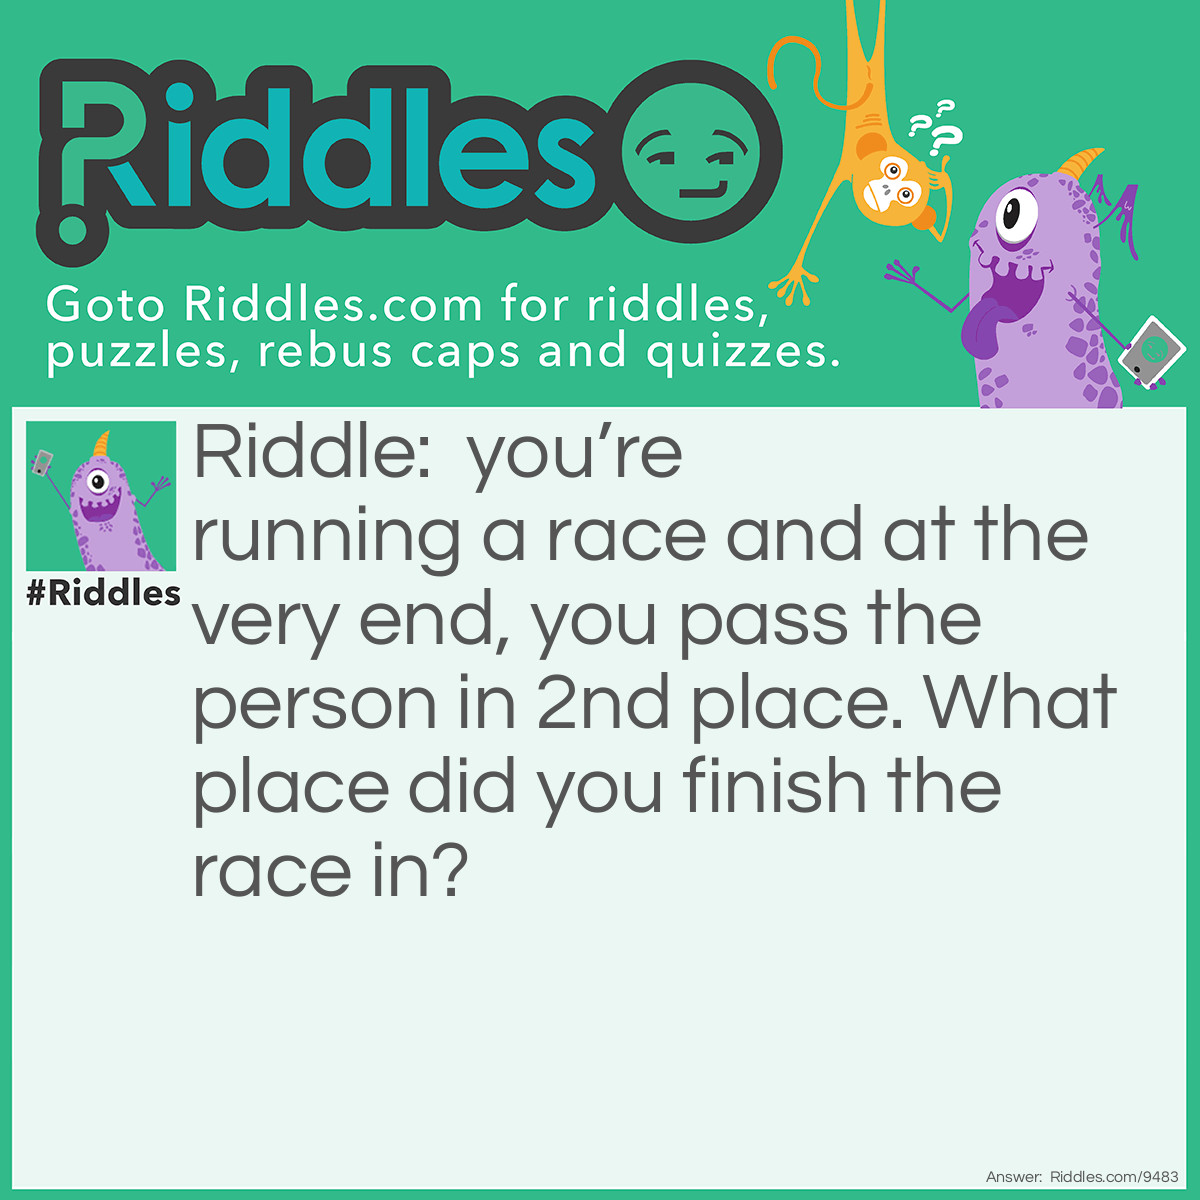 Riddle: you're running a race and at the very end, you pass the person in 2nd place. What place did you finish the race in? Answer: You finished in 2nd place.